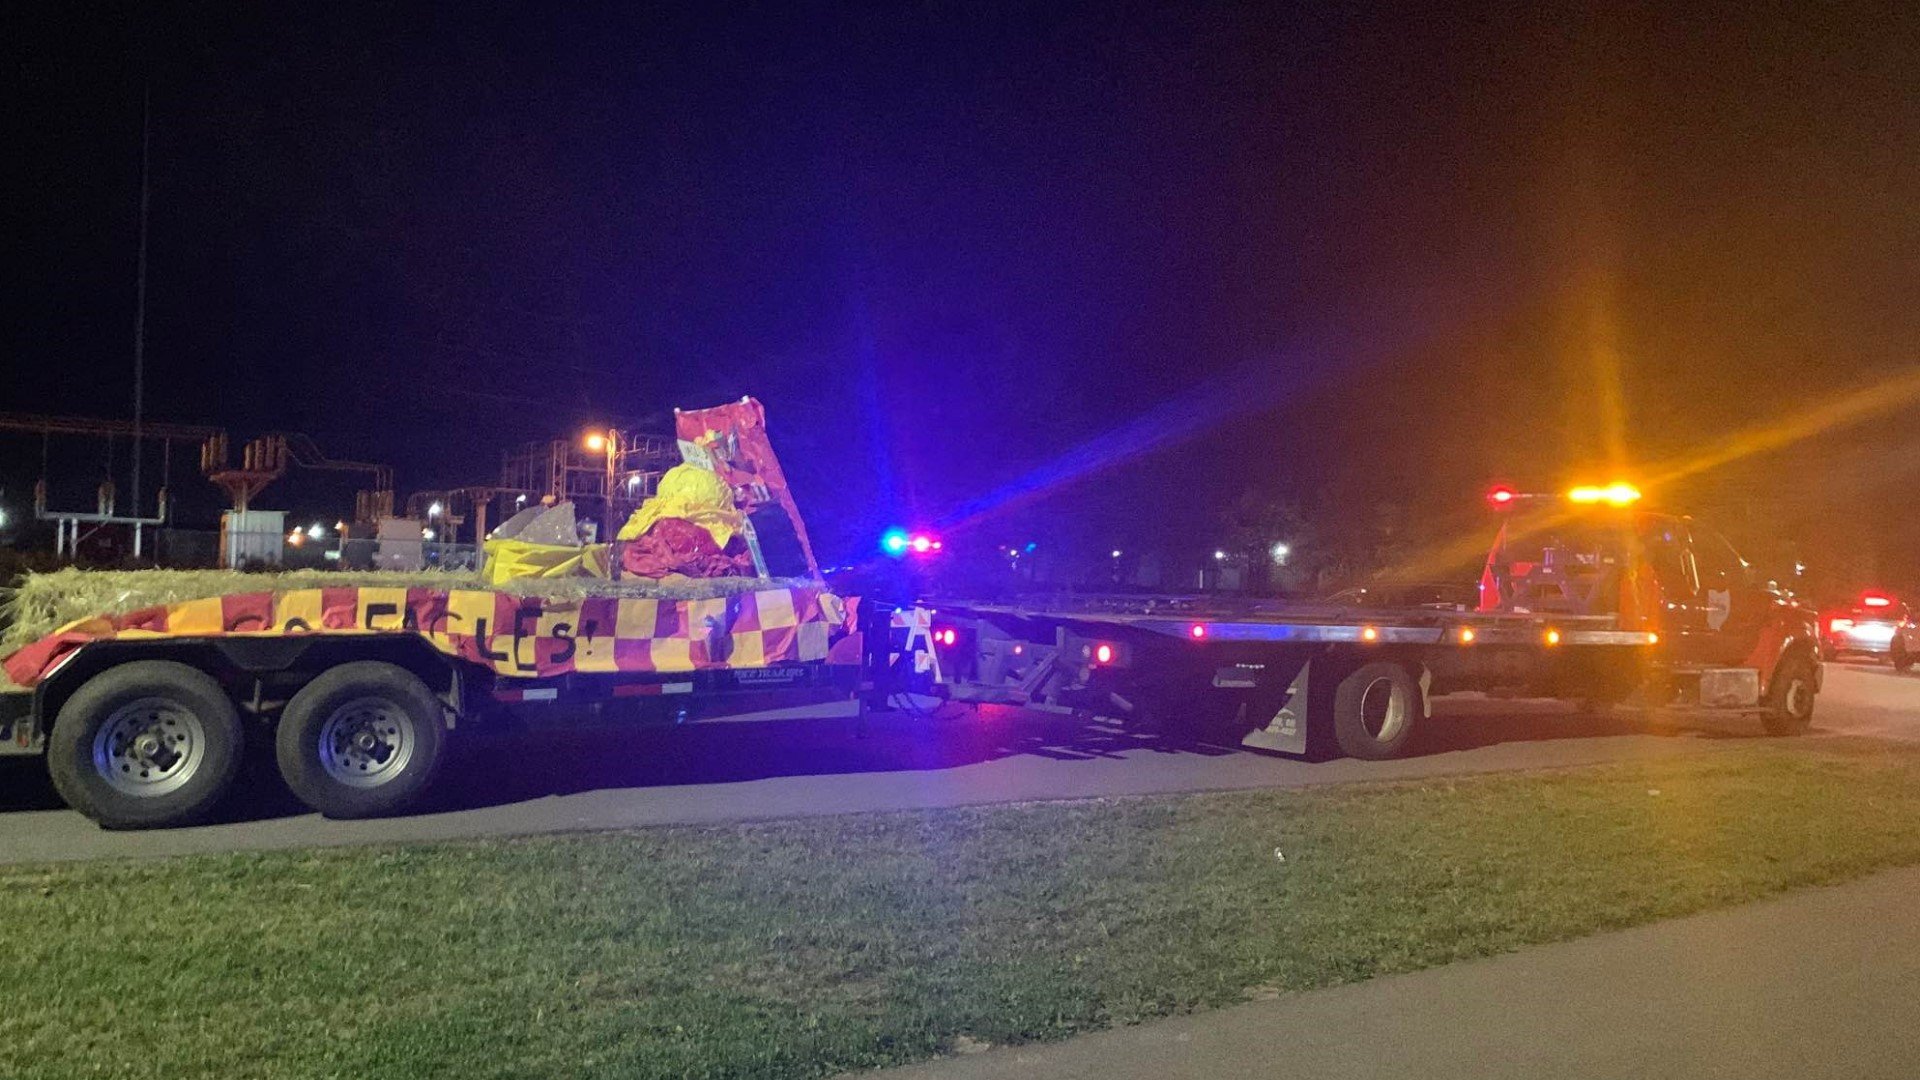 Ohio State Highway Patrol said the 11-year-old boy was struck around 6:50 p.m. by a float during the parade on North Miller Drive in Sunbury.